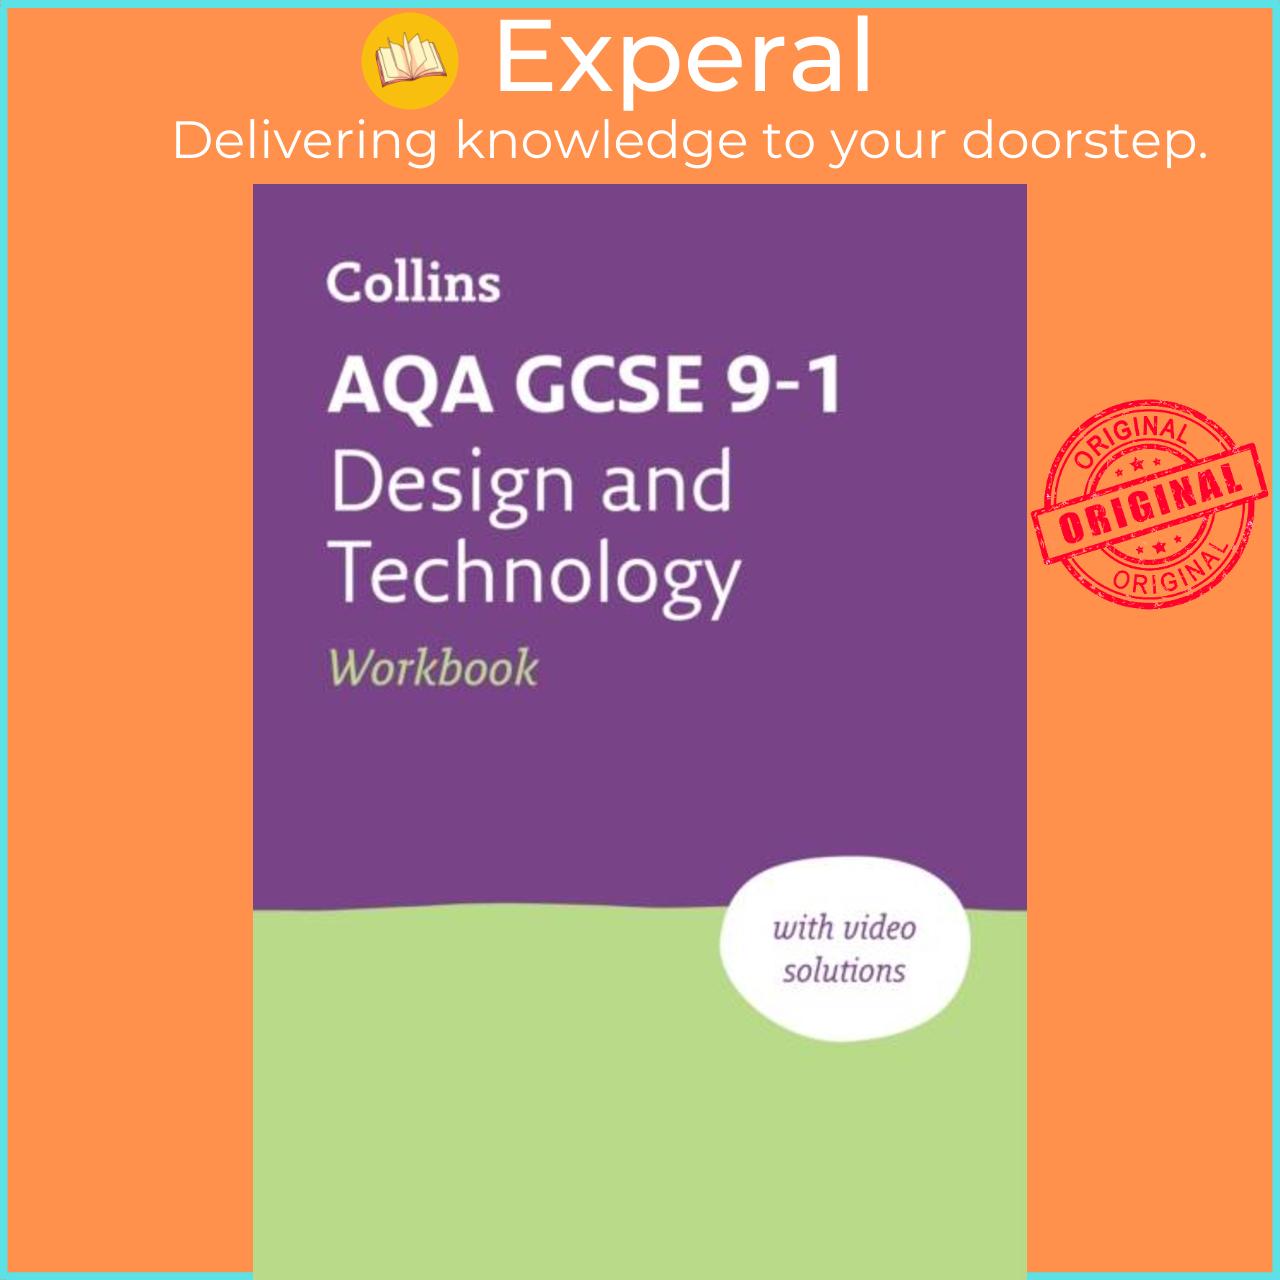 Sách - AQA GCSE 9-1 Design & Technology Workbook - Ideal for Home Learning, 2023 by Collins GCSE (UK edition, paperback)